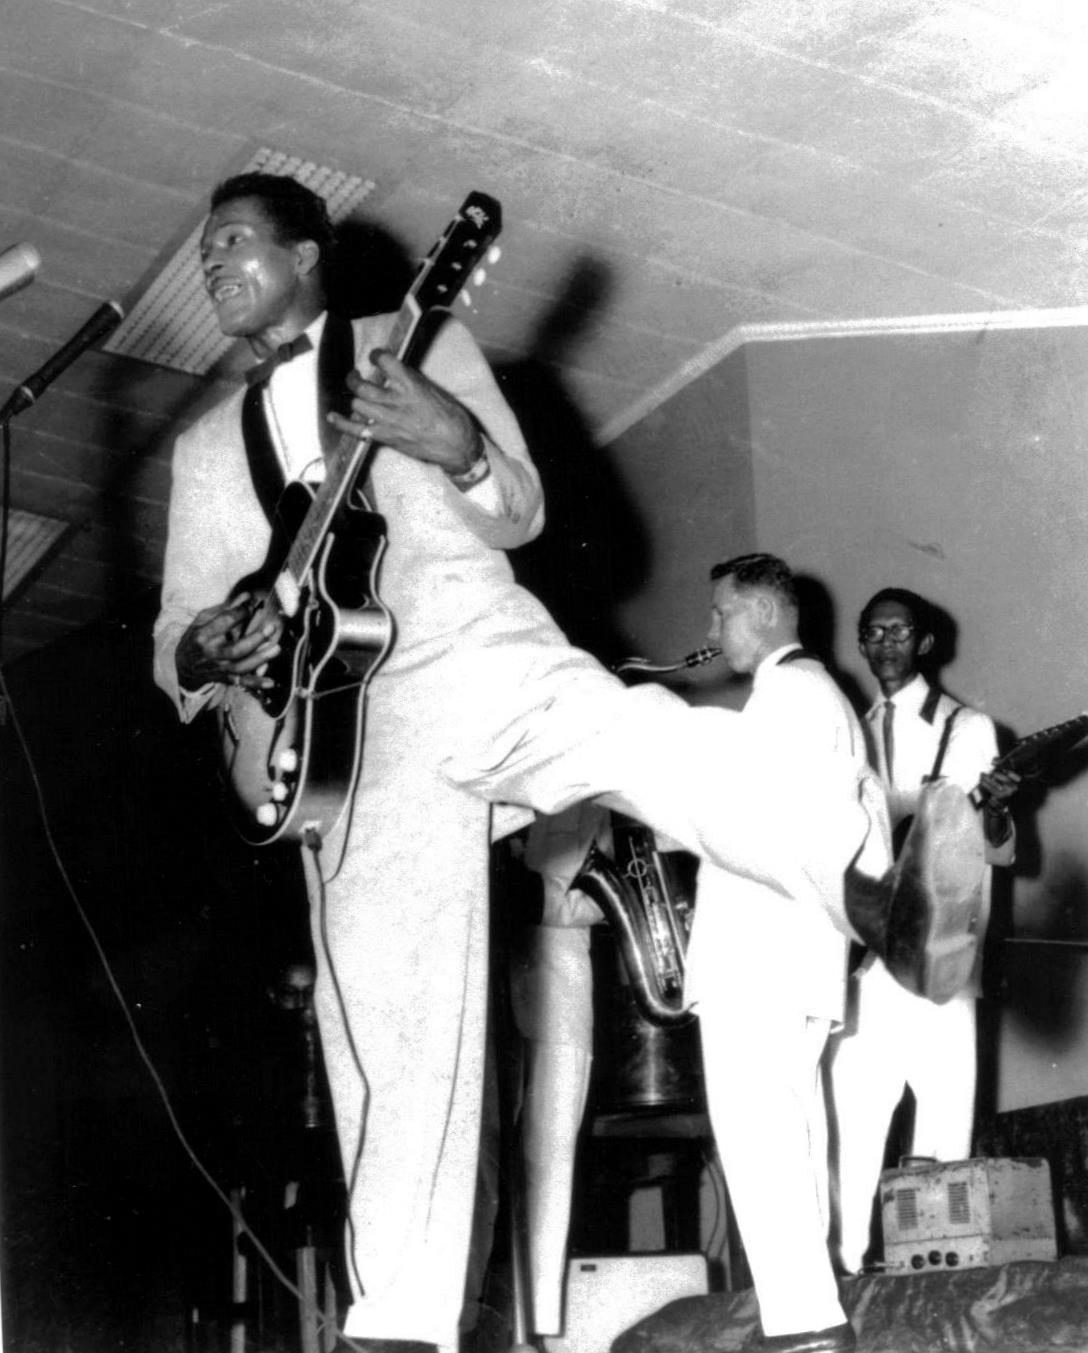 Chuck Berry in full flight, with Johnny Greenan on tenor sax and Lou Nanlohy on guitar supporting in the back ground.@ Melbourne Festival Hall in 1958